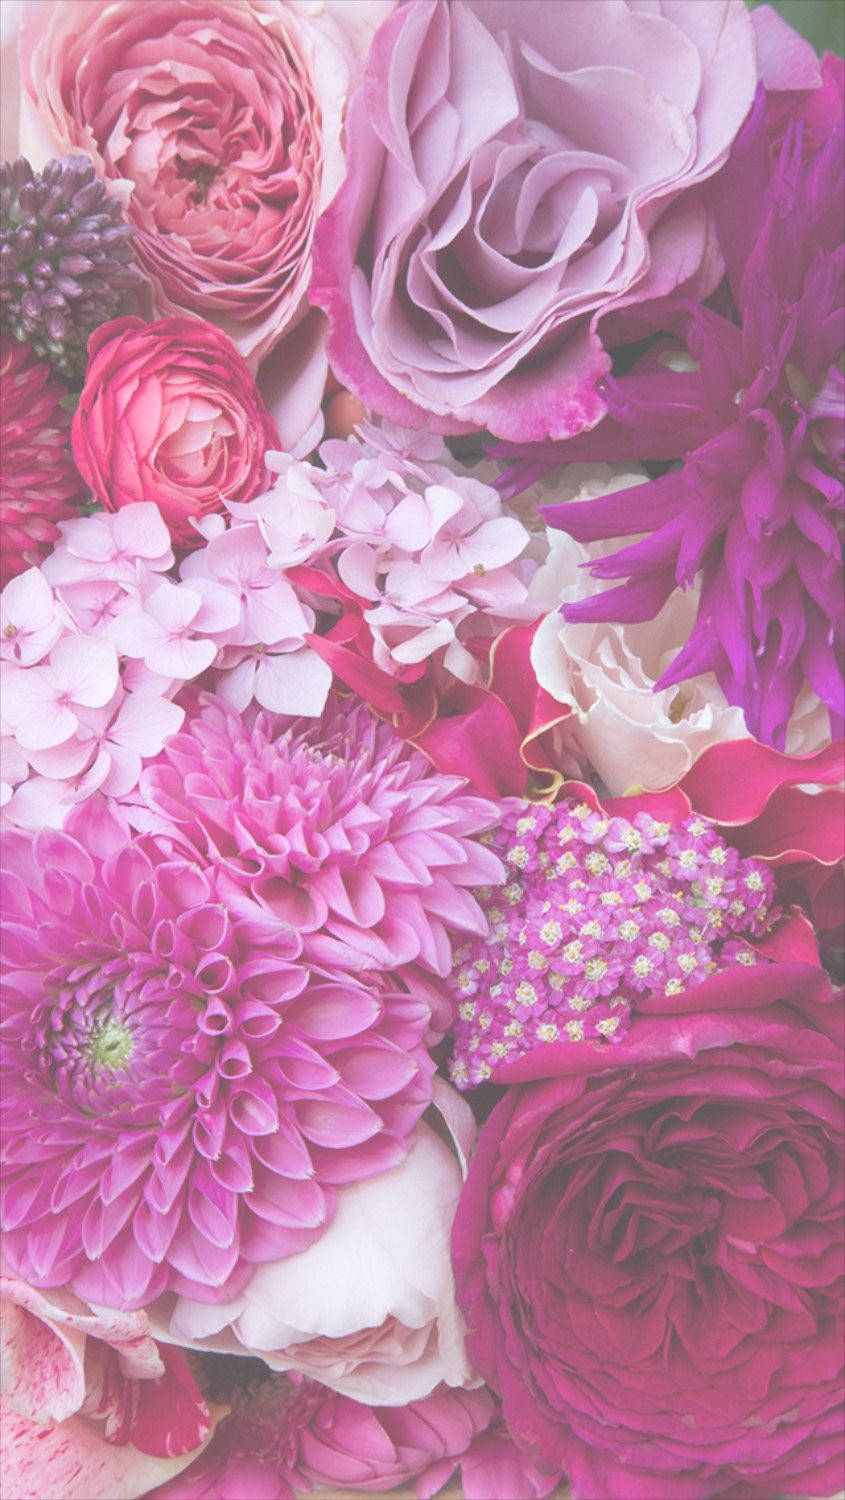 Pink Dahlia And Roses Floral Iphone Wallpaper